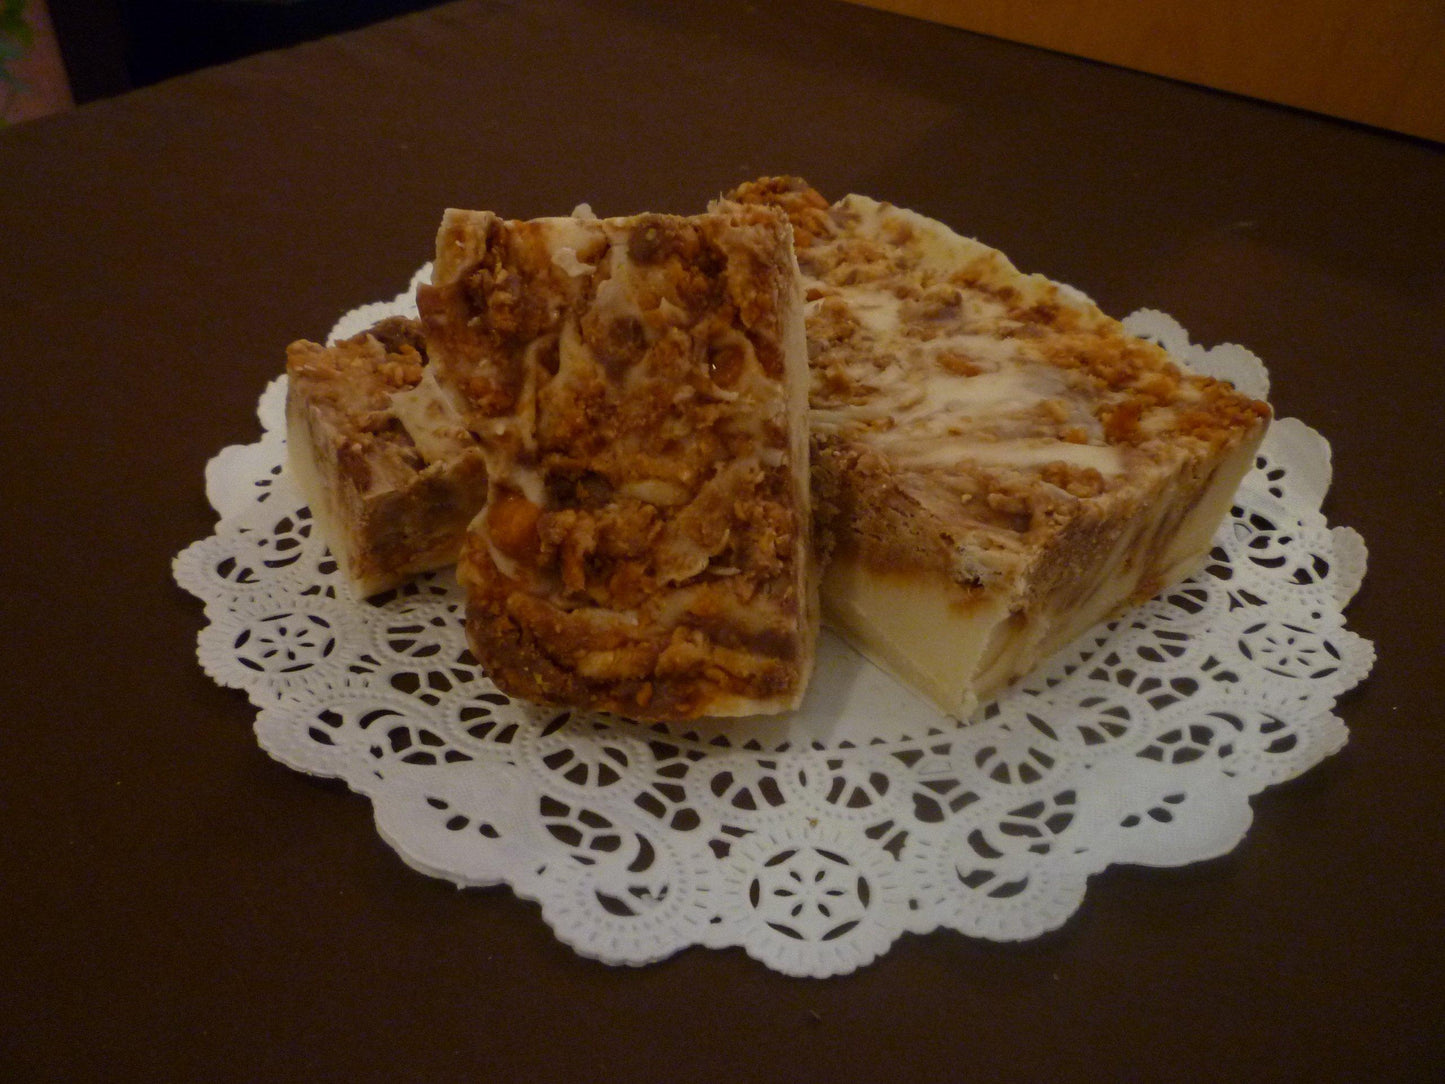 Fudge with Butterfinger - (our vanilla fudge loaded with real Butterfinger crumbles)